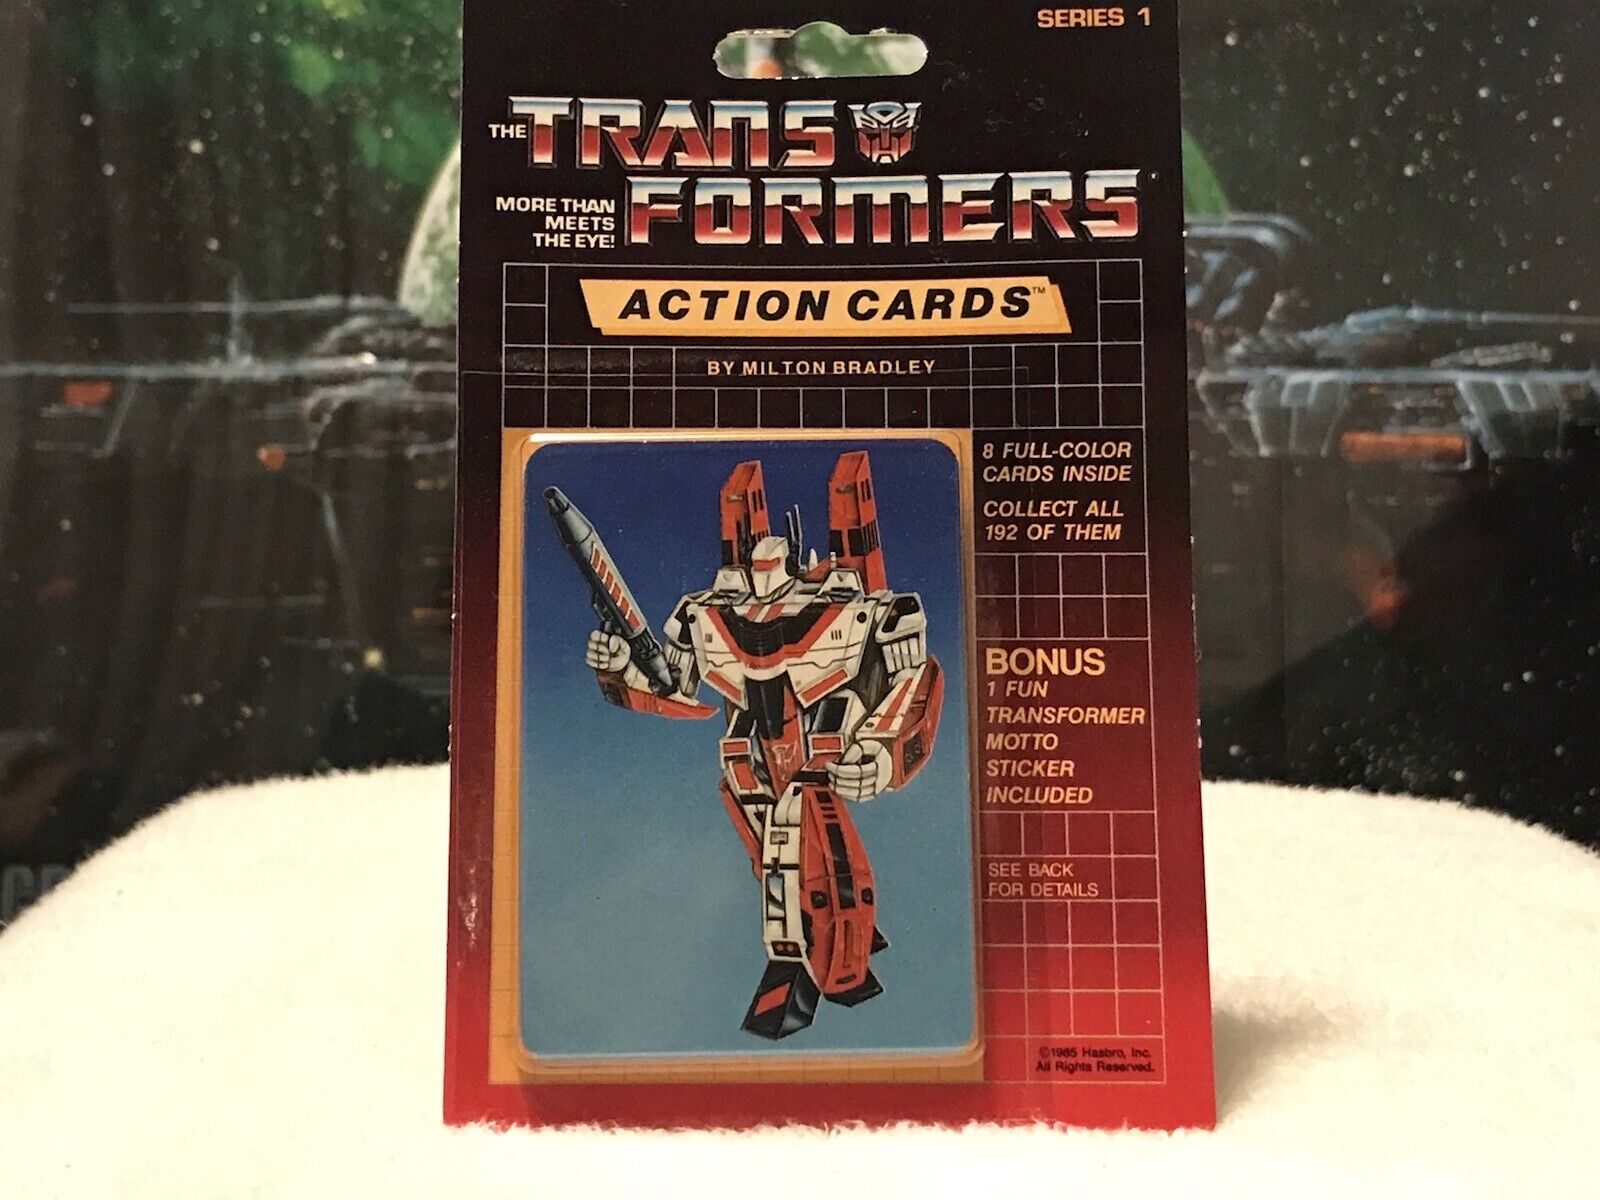 1985 Hasbro TRANSFORMERS Action Cards Sealed Pack, # 38 “JETFIRE” on the Front